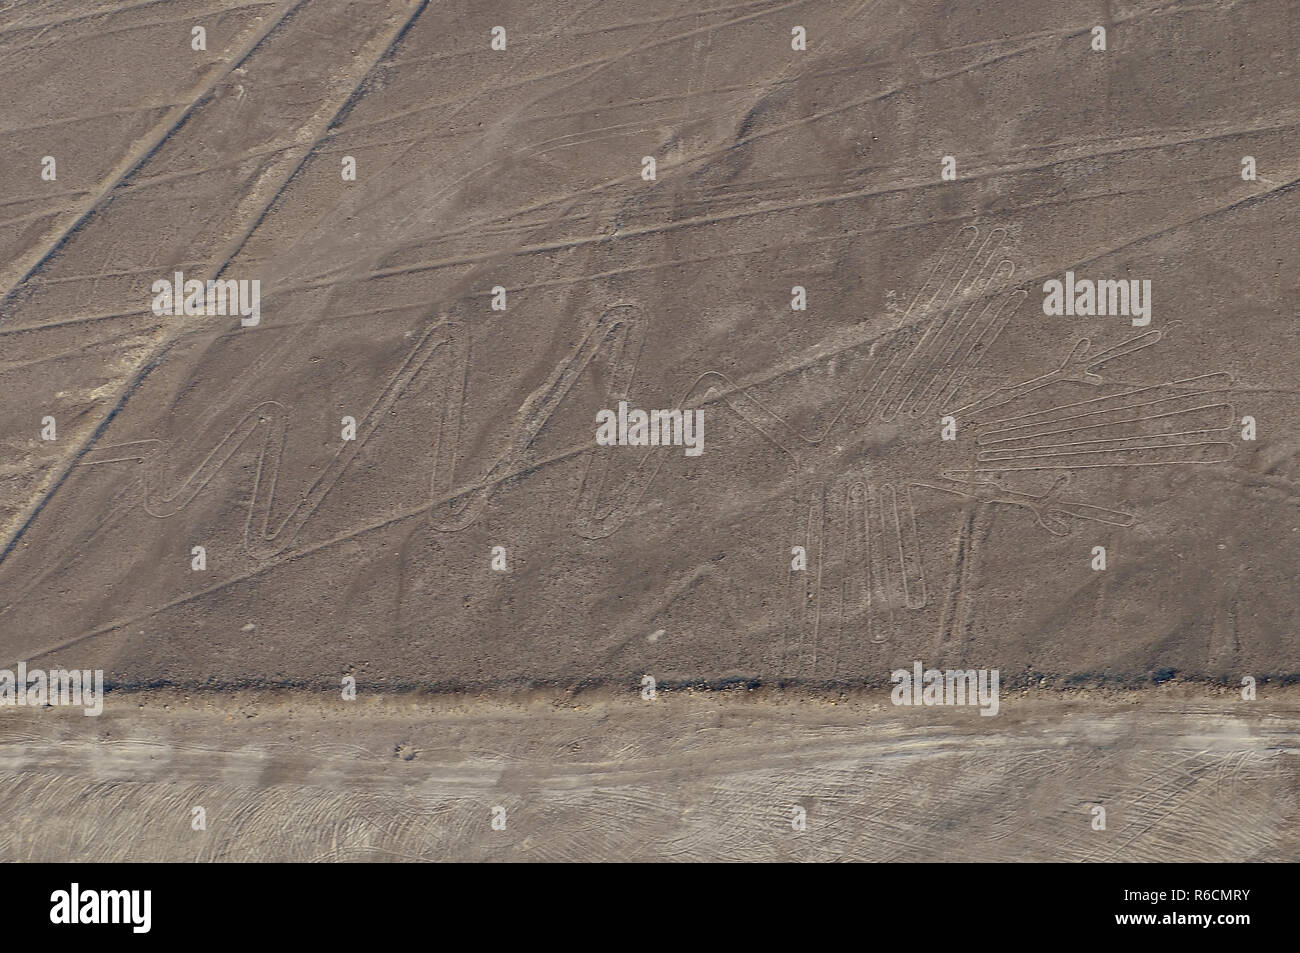 Peru, Lines Of Nasca, Aerial View, The Heron Stock Photo